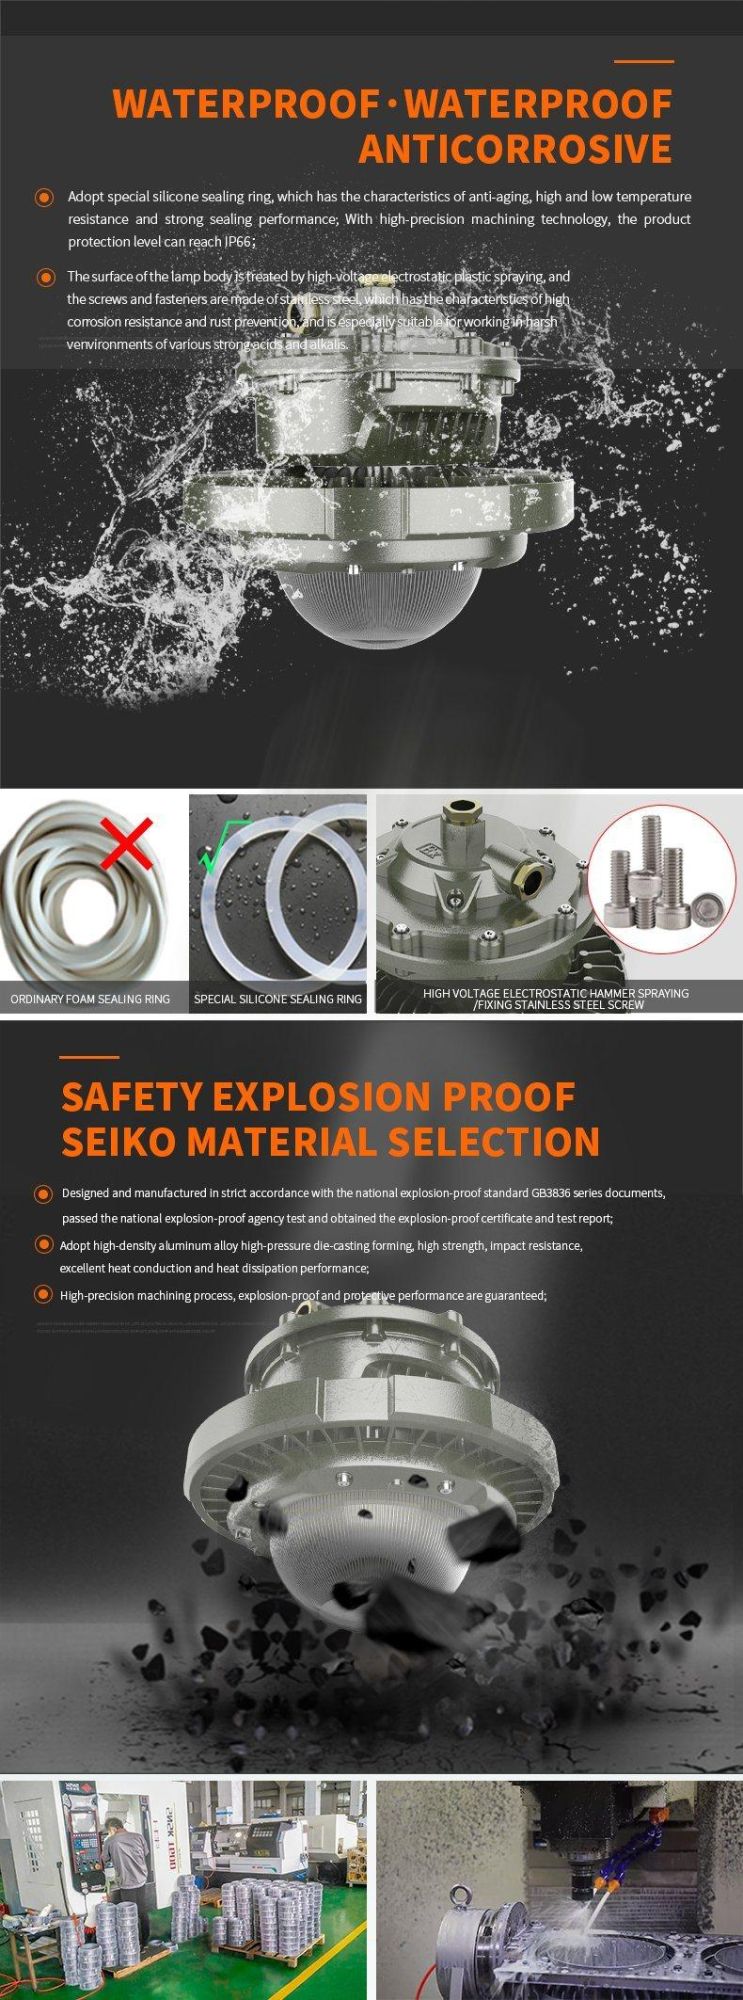 Atex LED Explosion-Proof Projector Lamp for Gas Station Lighting with Well Heat Dissipation